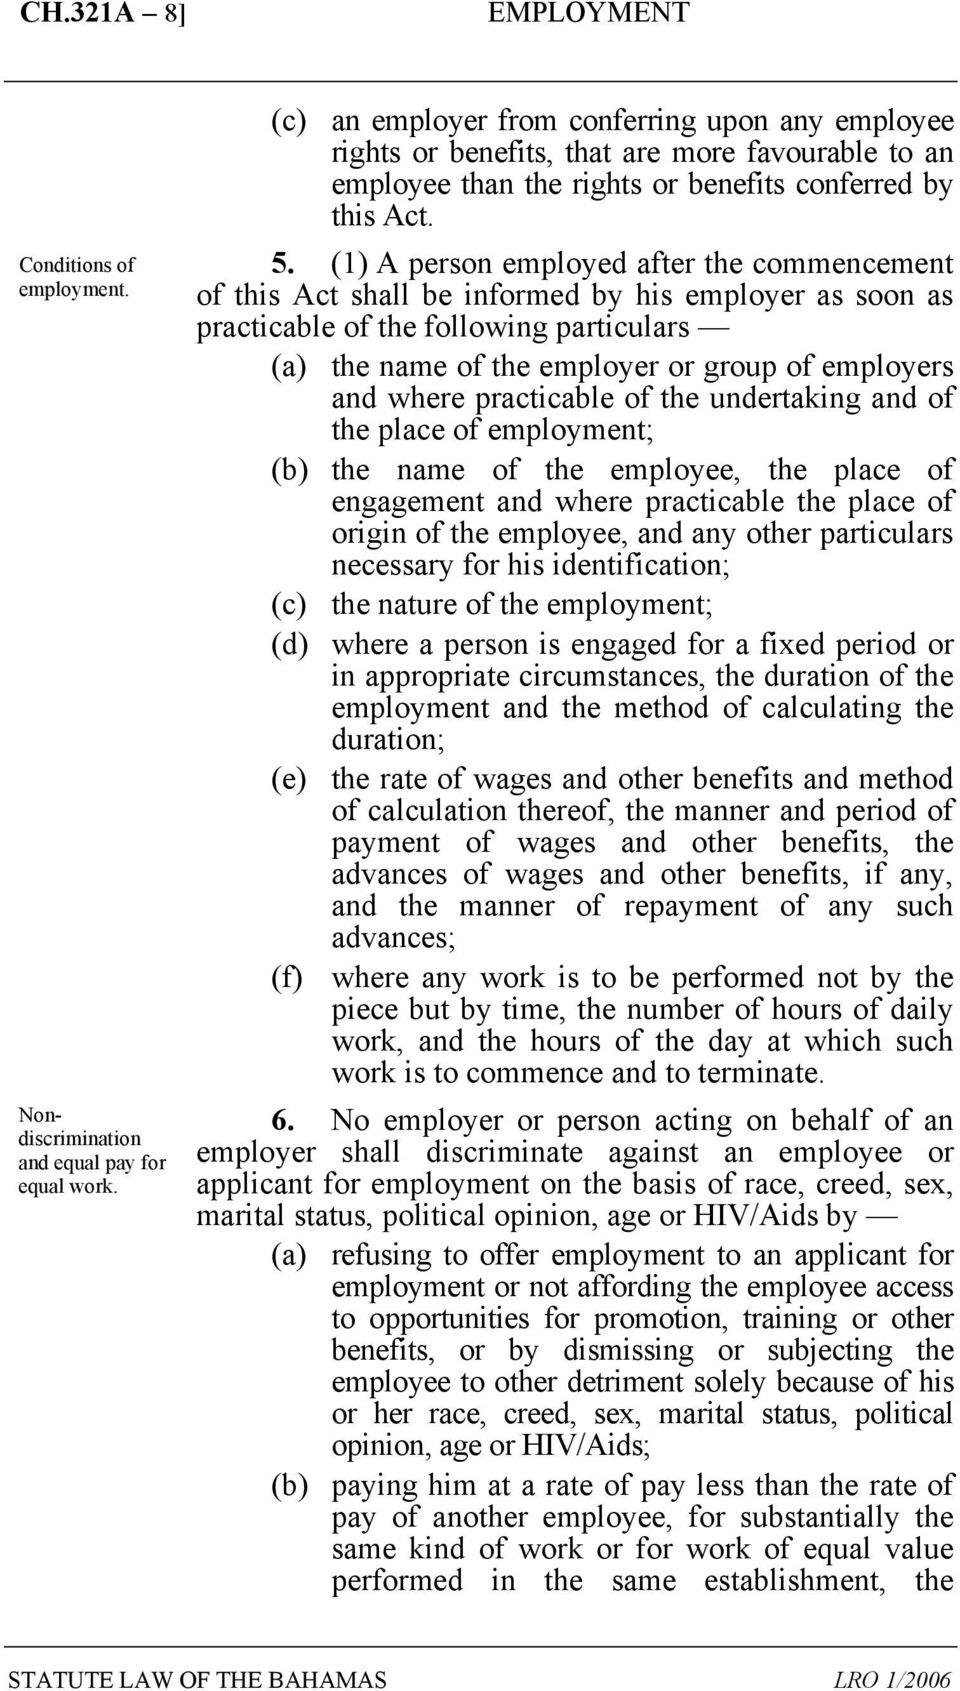 (1) A person employed after the commencement of this Act shall be informed by his employer as soon as practicable of the following particulars (a) the name of the employer or group of employers and